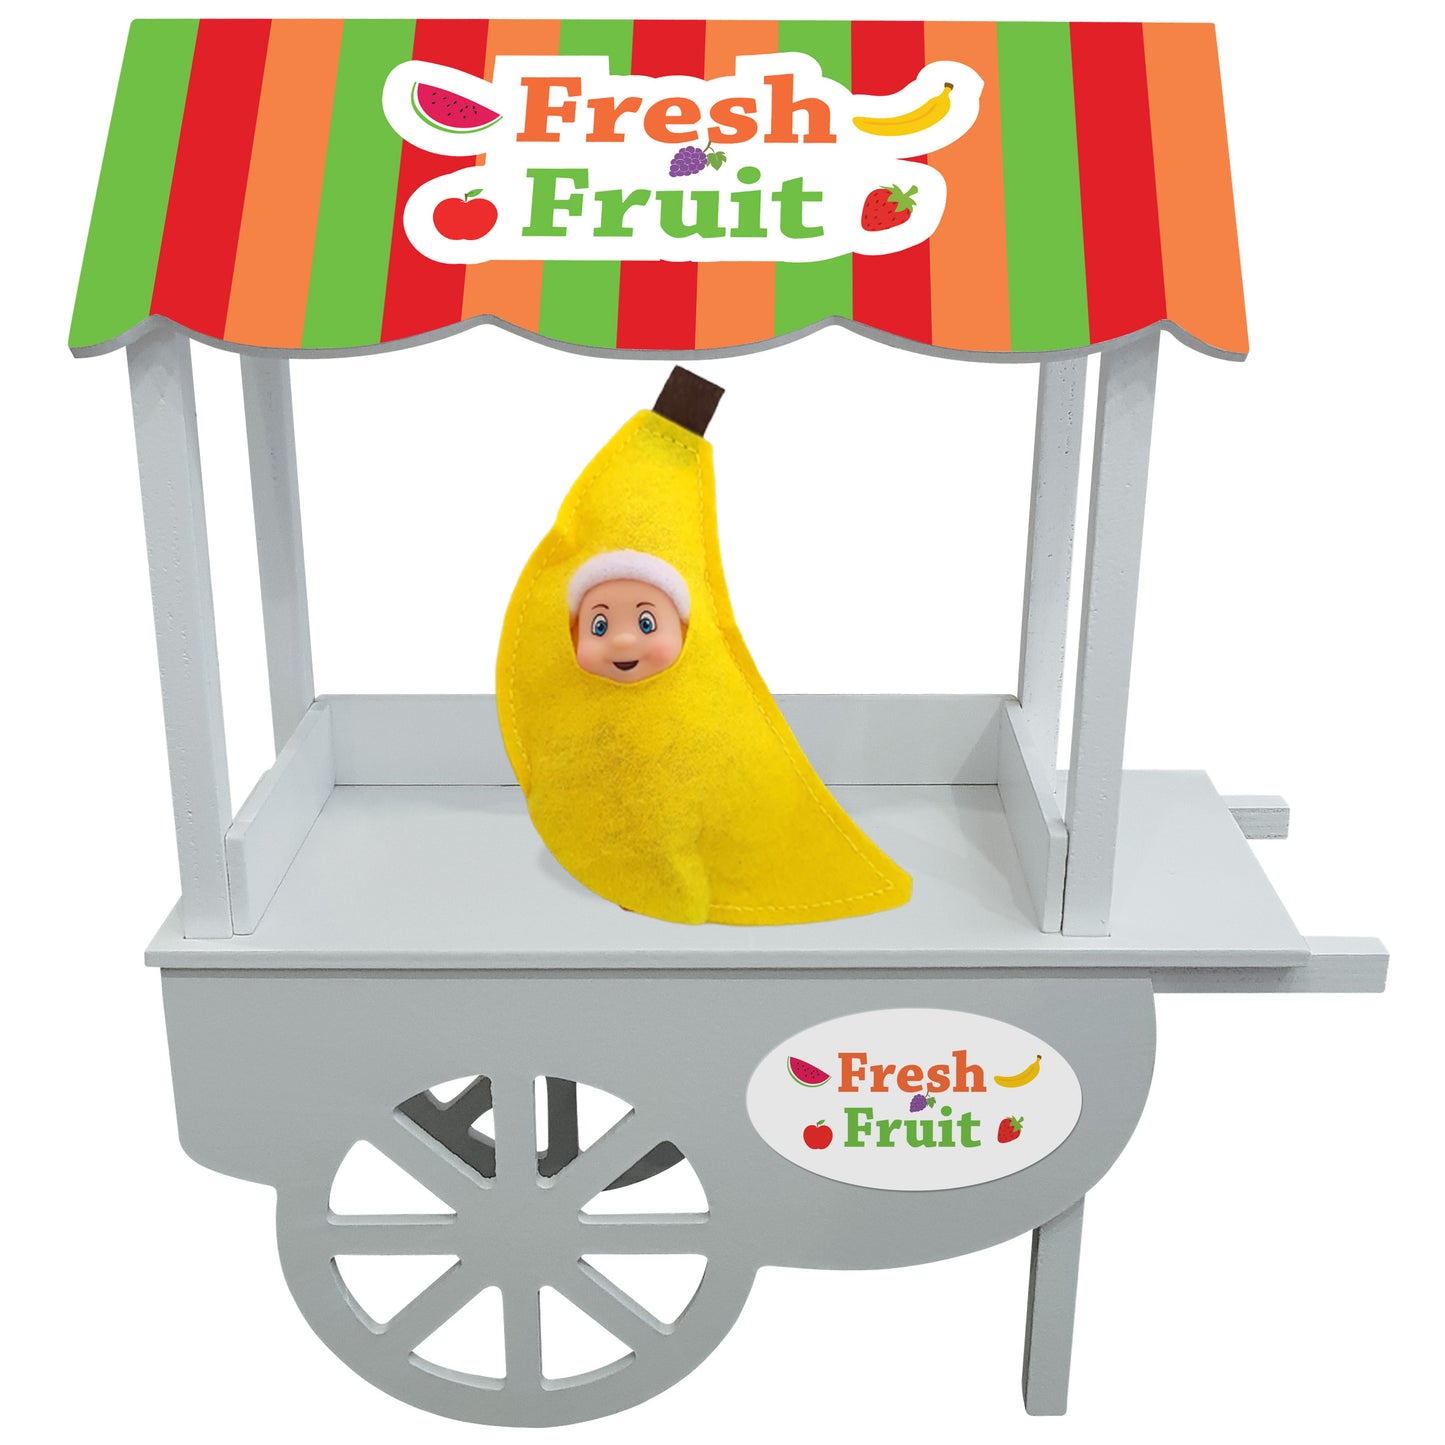 Fruit stand selling an elf baby banana